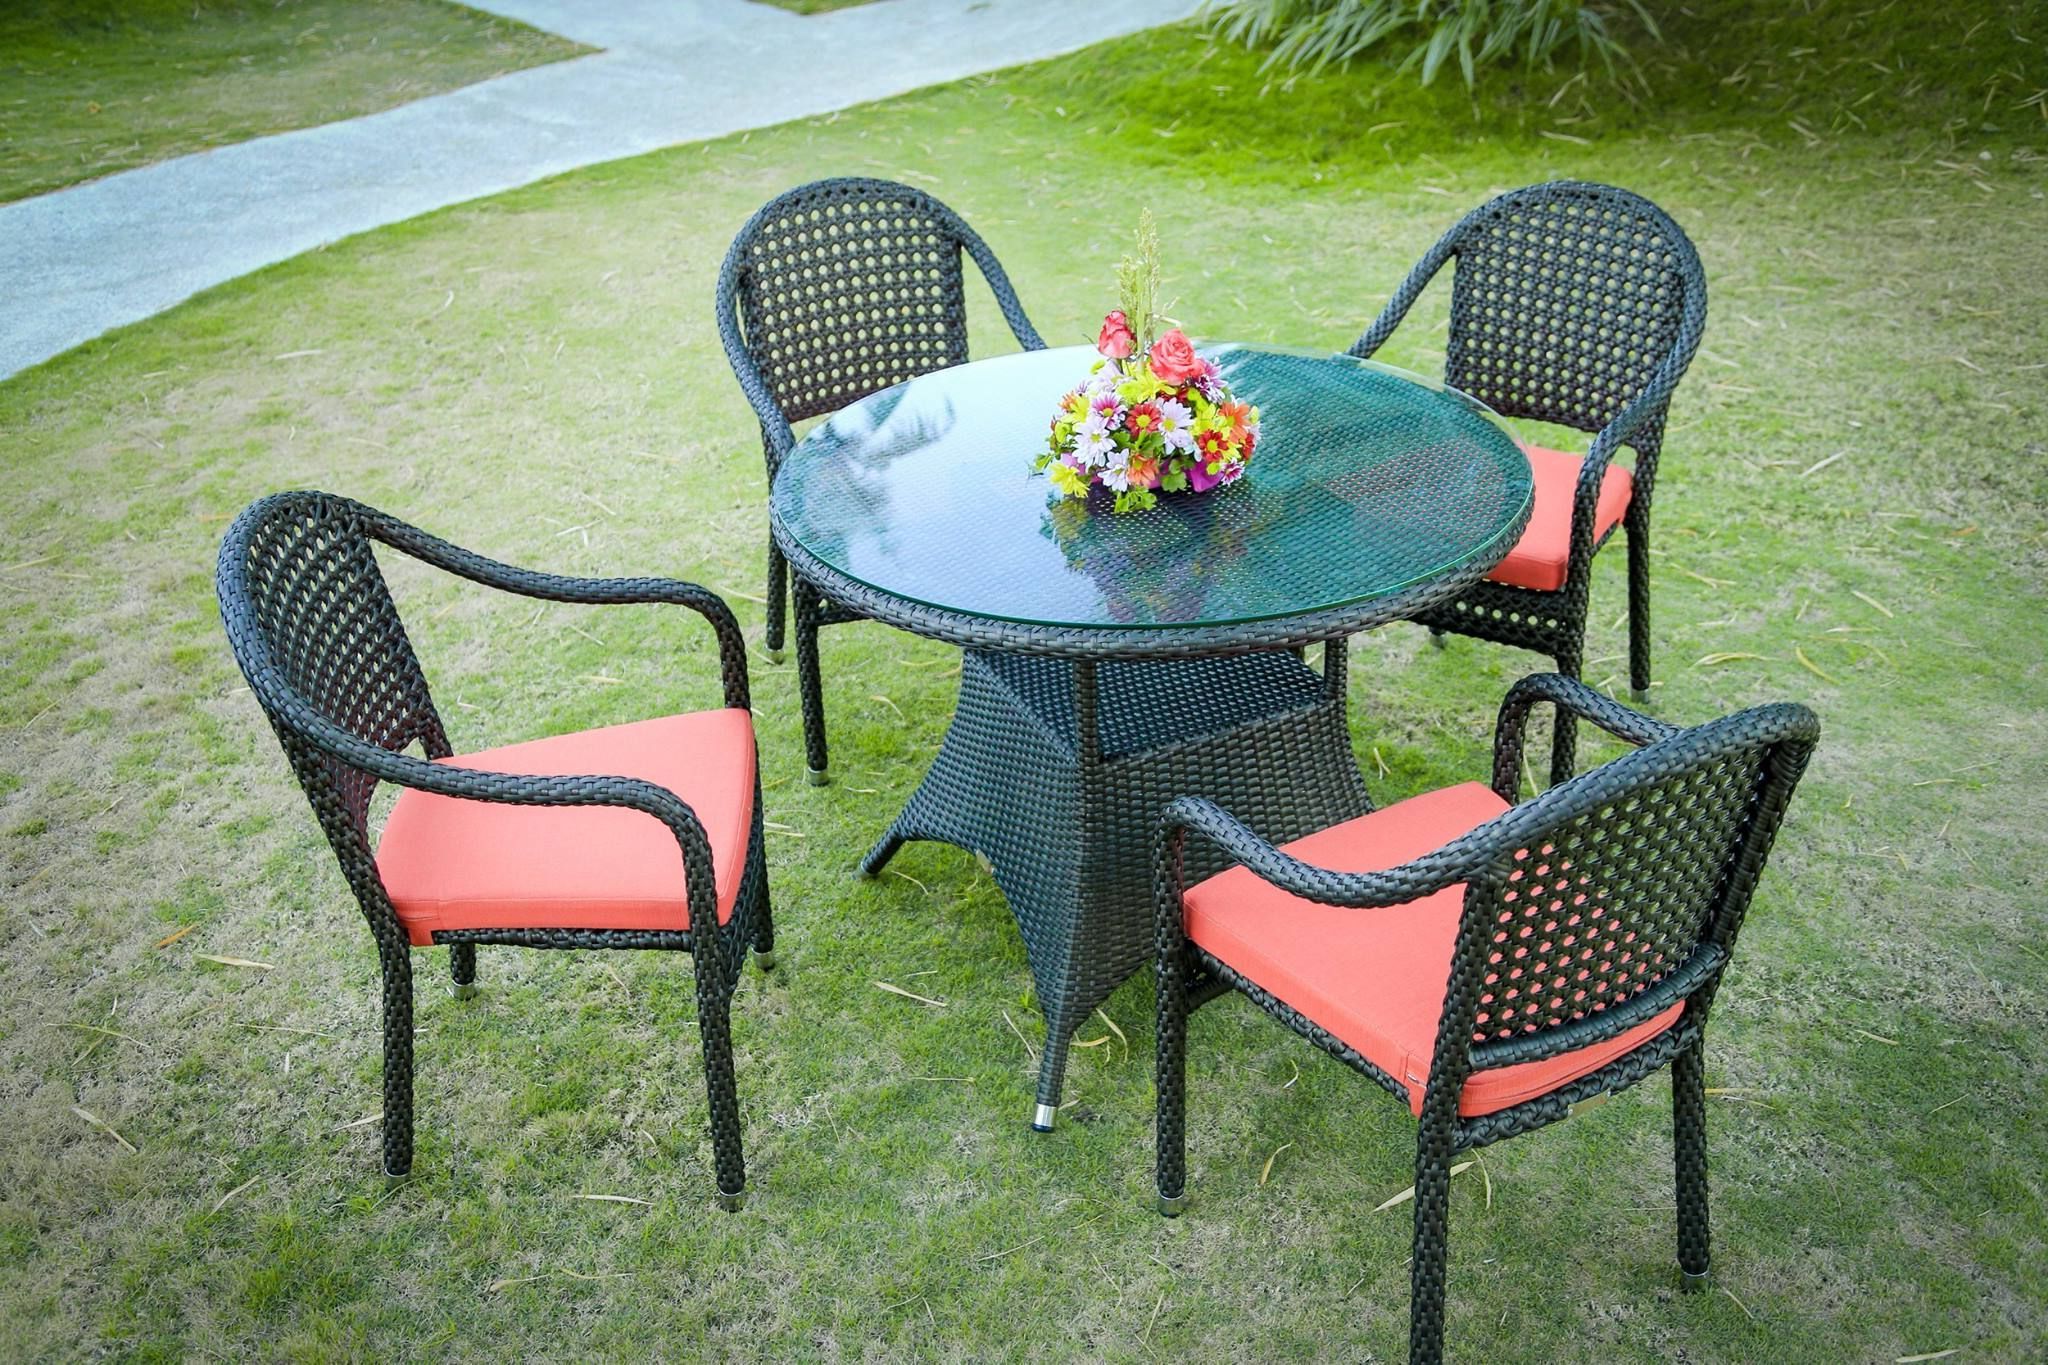 Havenside Home Fenwick Chaise Lounge Chairs Throughout Latest Outdoor Dining Set Of Cebu Outdoor Furniture, Cebu Furniture (View 13 of 25)